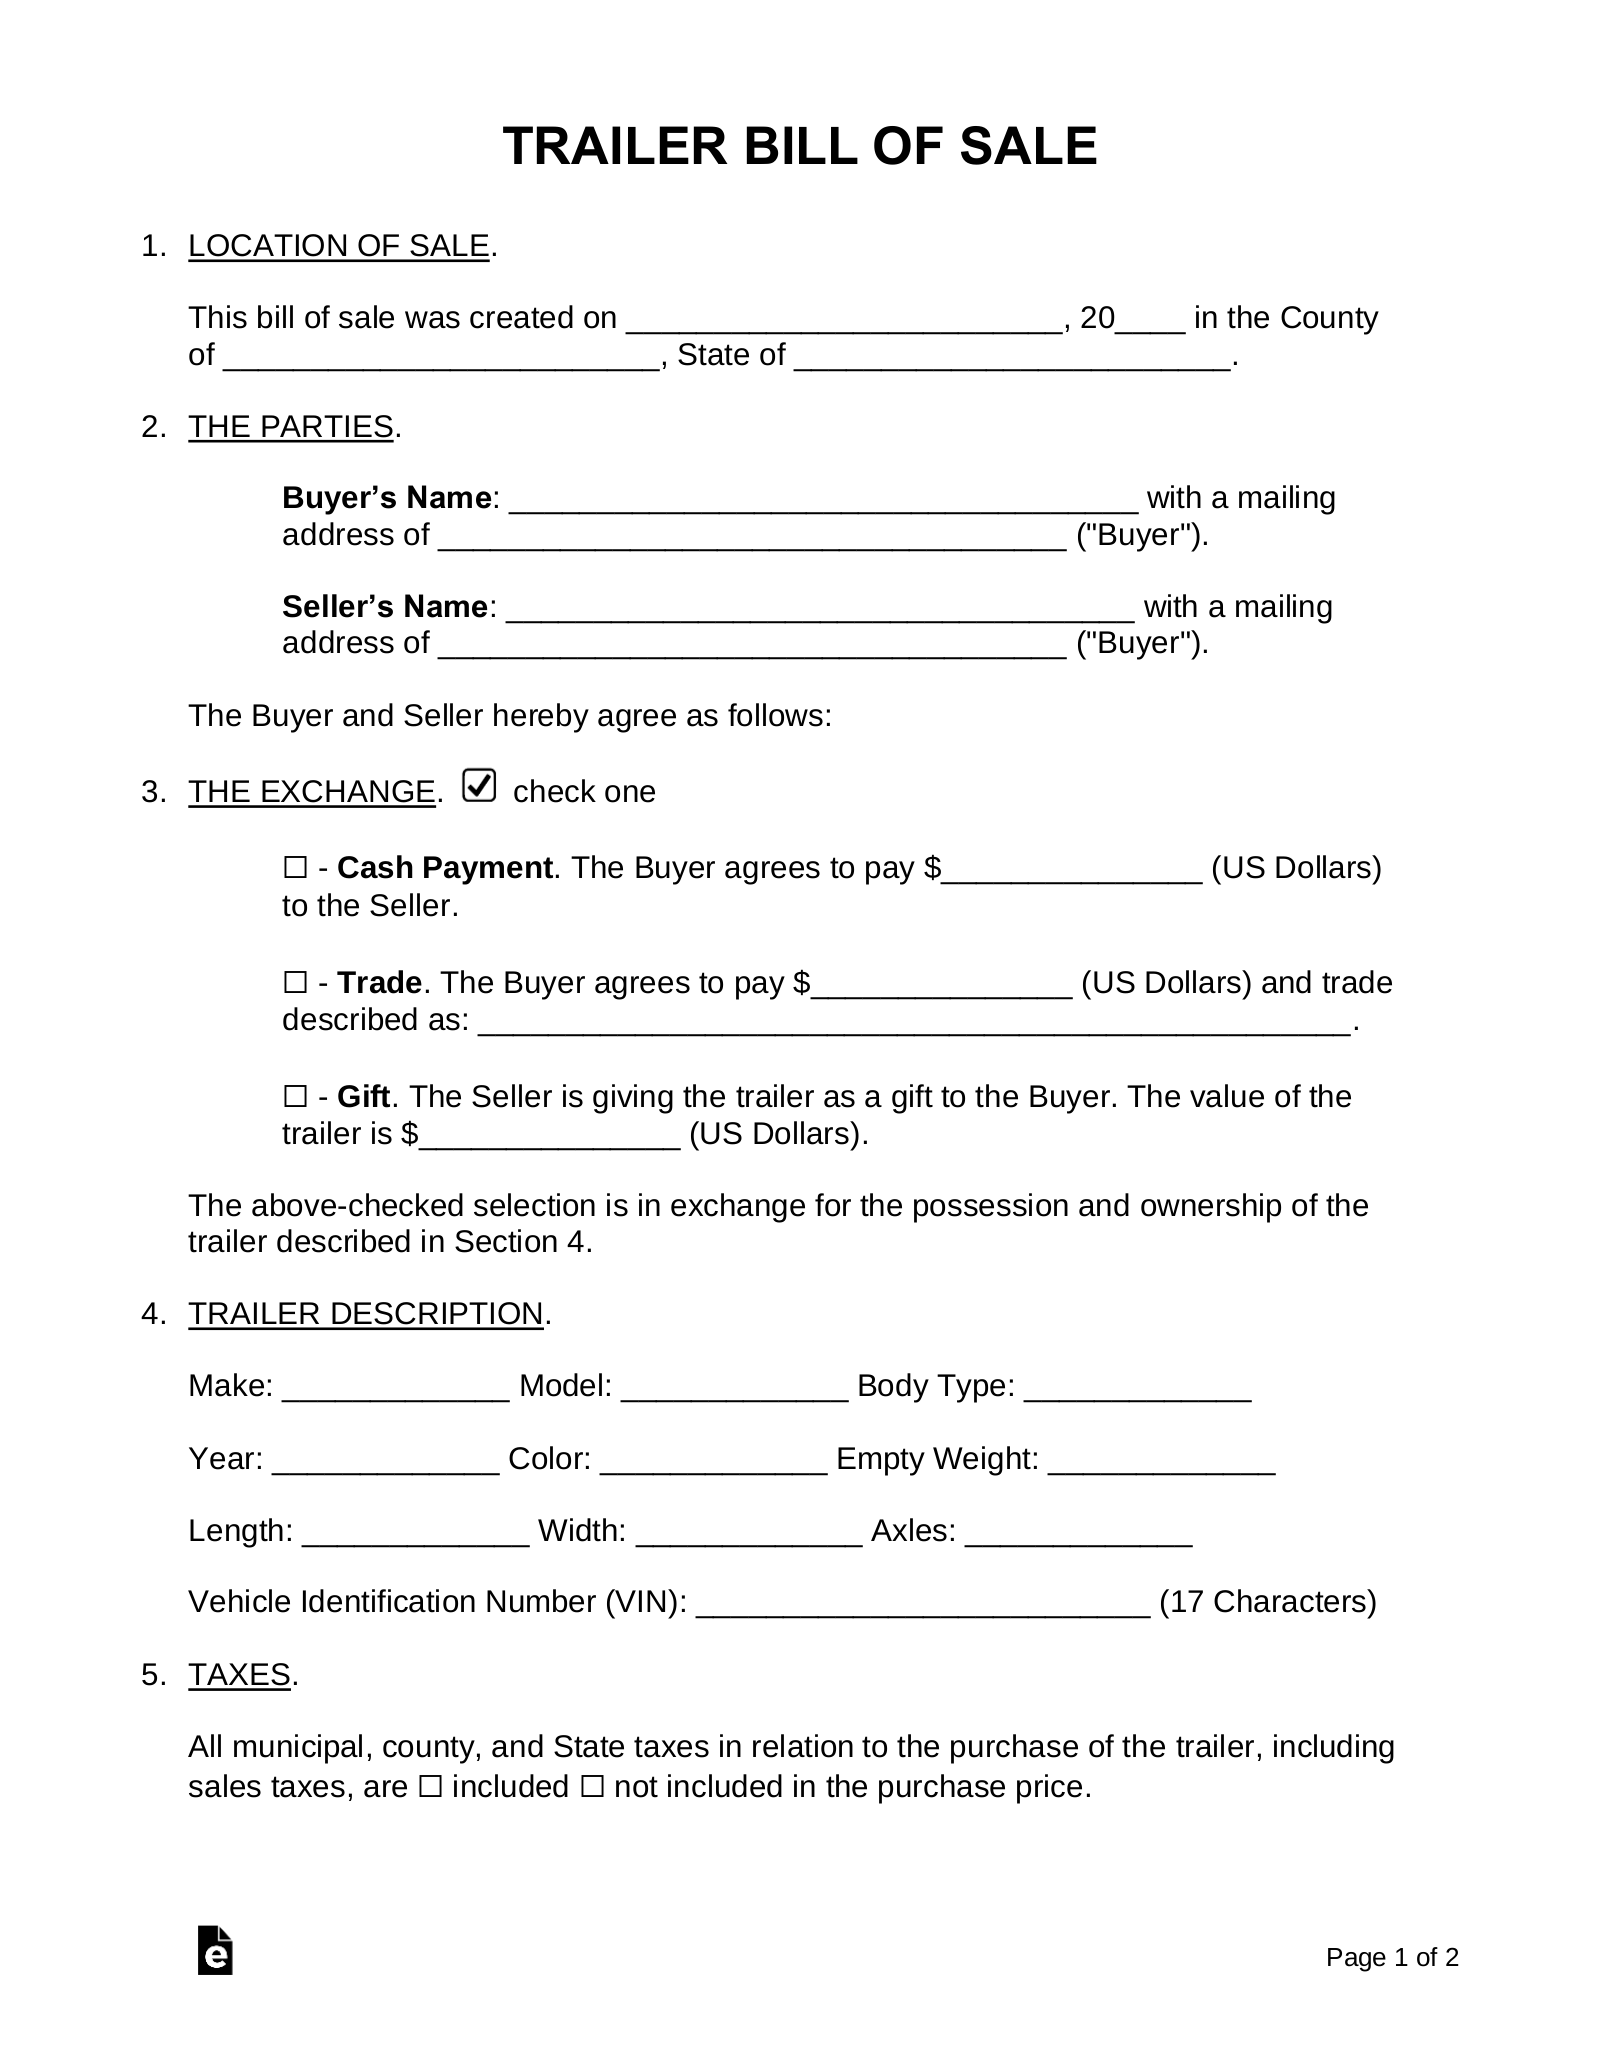 Free Trailer Bill of Sale Form - Word